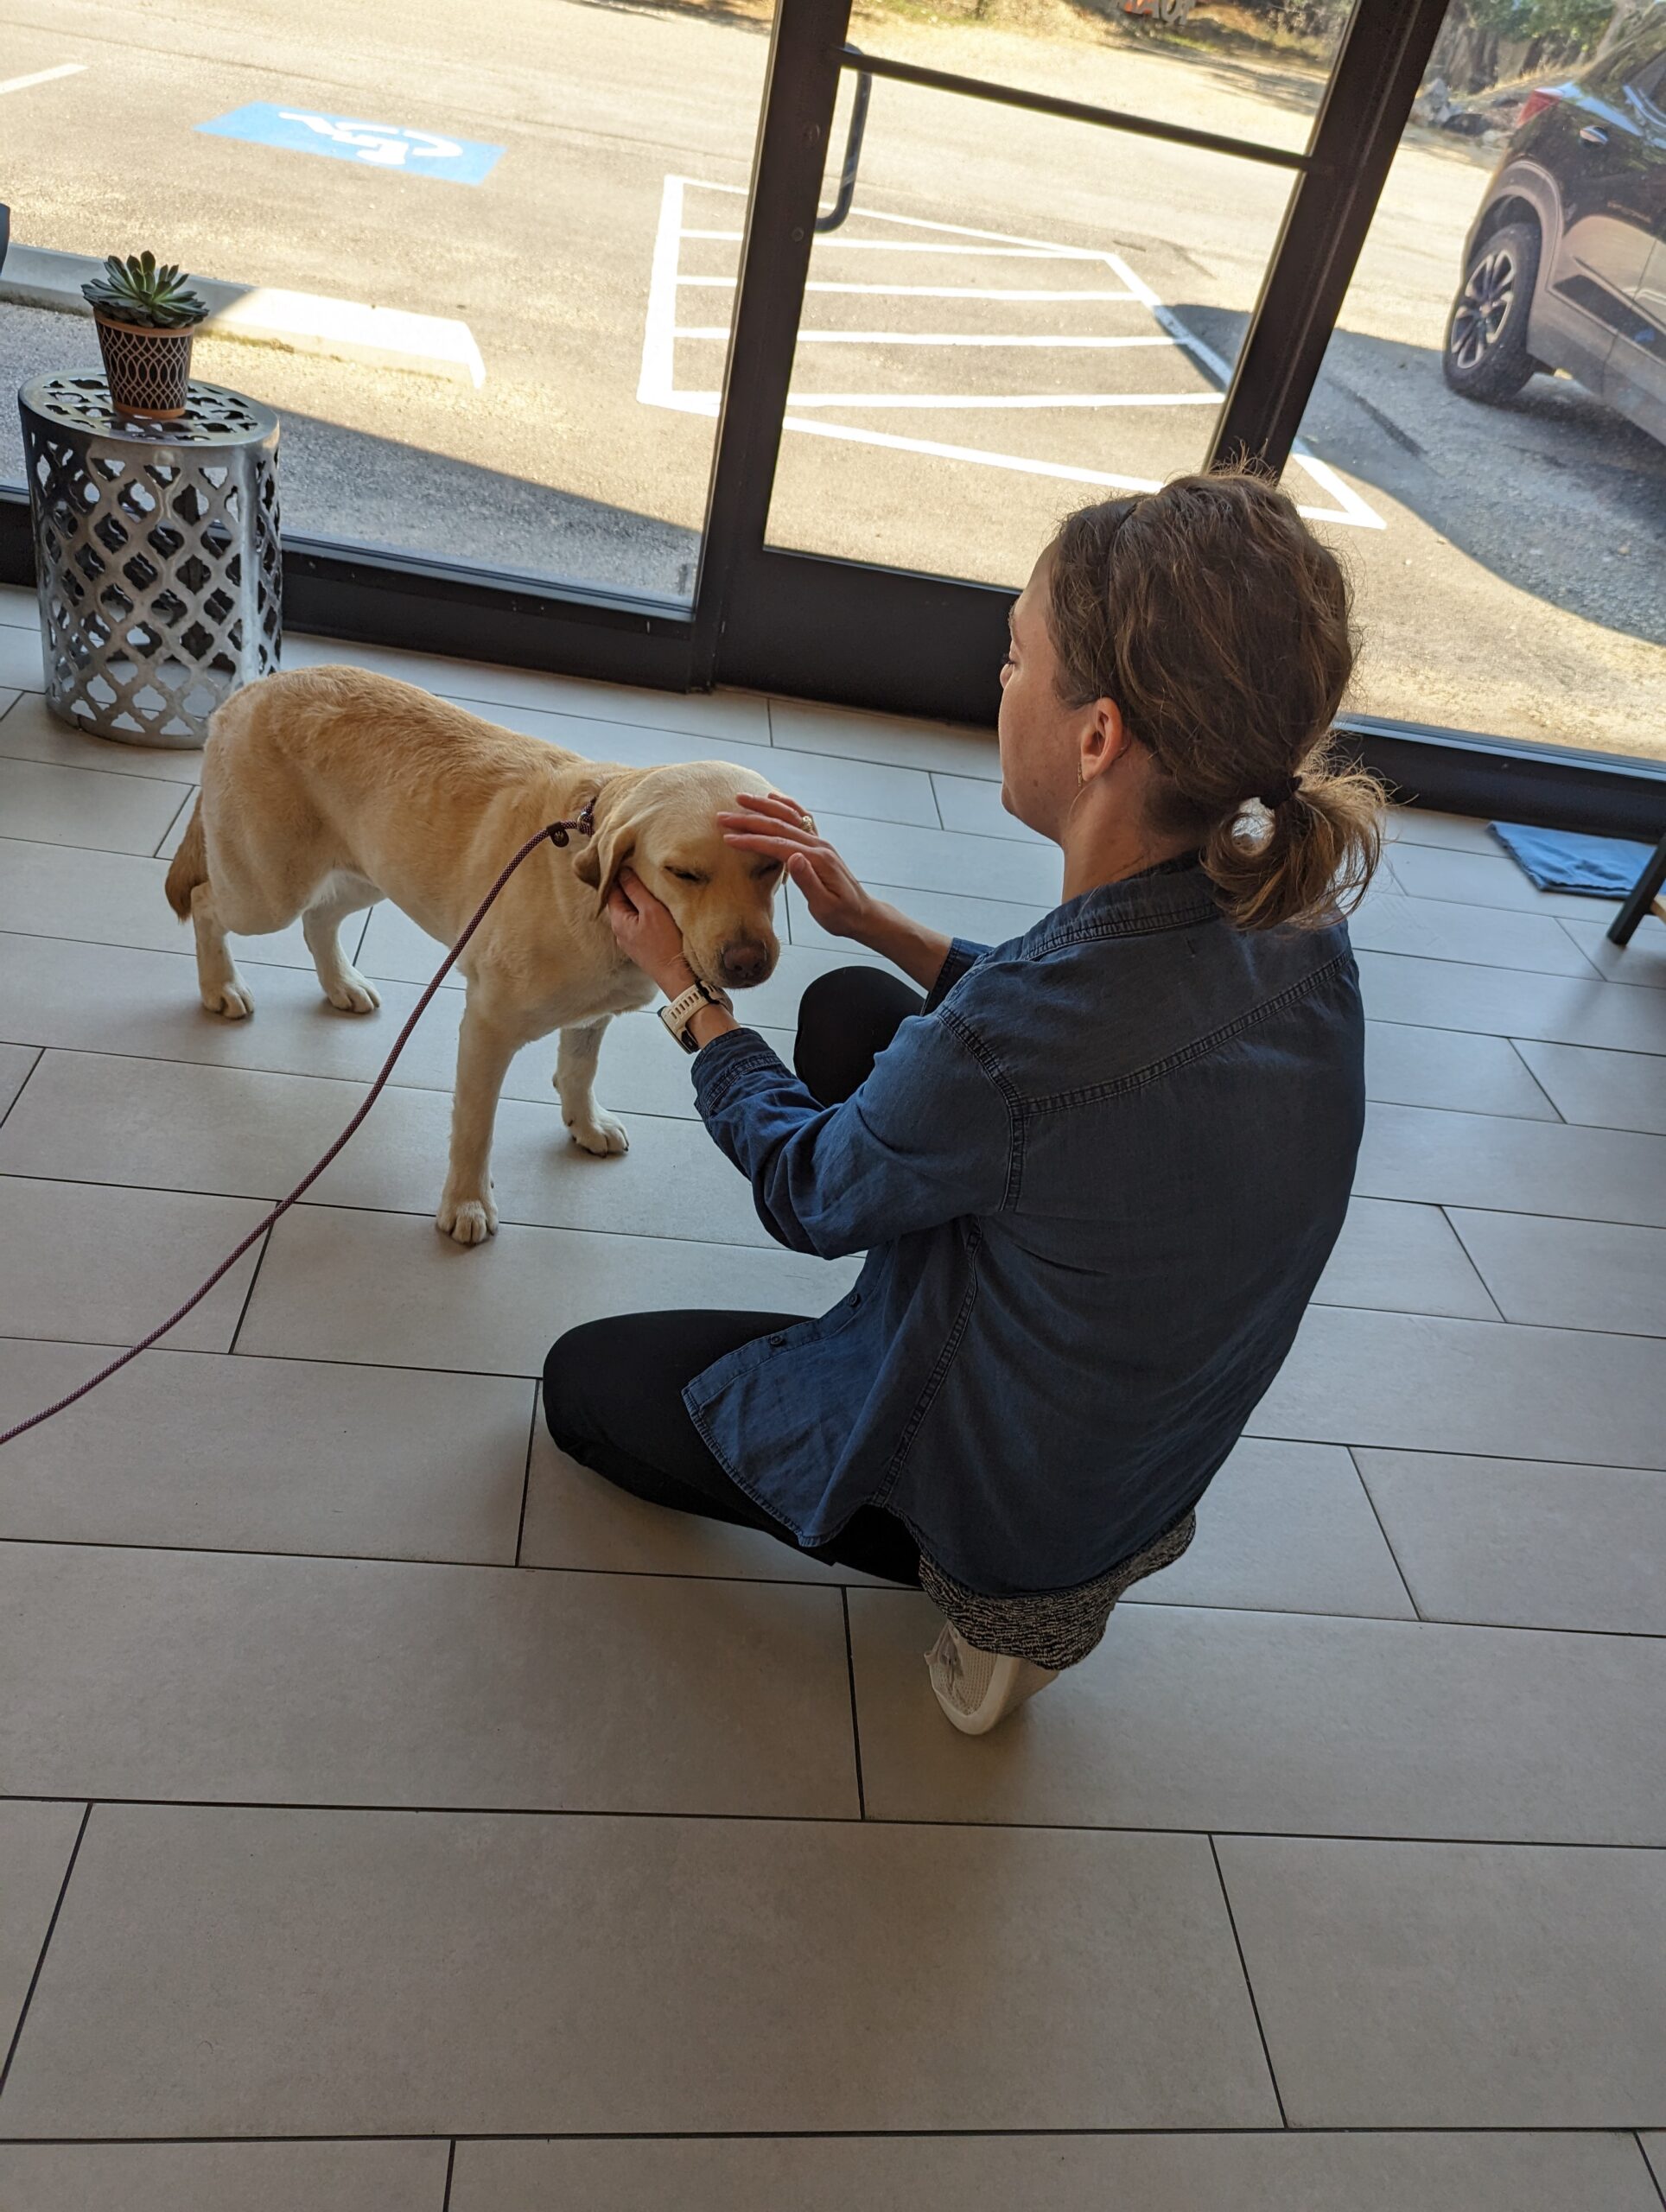 a person kneeling on a tile floor petting a dog<br />
